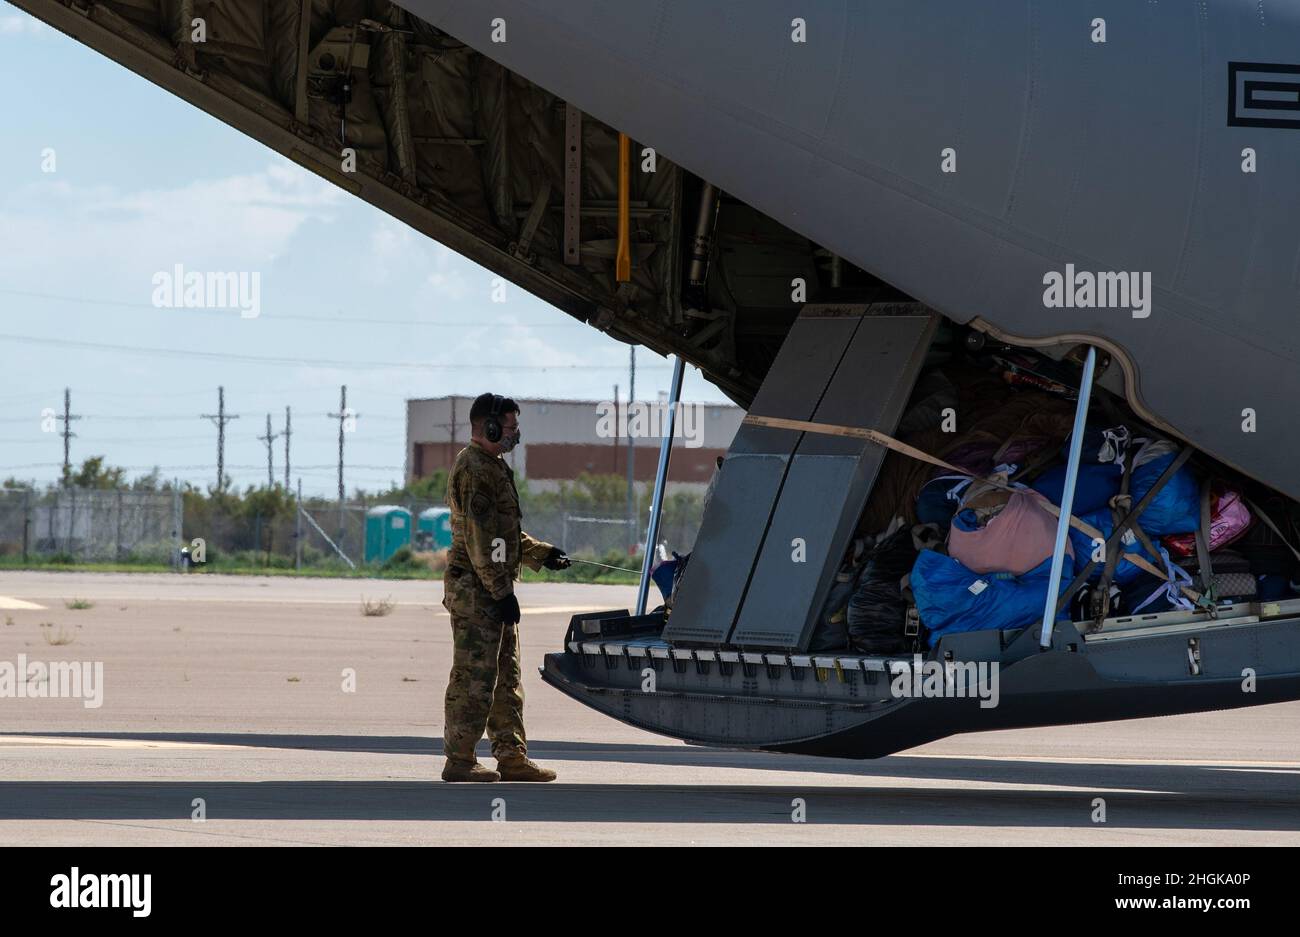 An Airman assigned to Task Force - Holloman prepares to unload luggage in support of Operation Allies Welcome, Aug. 31, 2021, on Holloman Air Force Base, New Mexico. The Department of Defense, through U.S. Northern Command, and in support of the Department of Homeland Security, is providing transportation, temporary housing, medical screening, and general support for up to 50,000 Afghan evacuees at suitable facilities, in permanent or temporary structures, as quickly as possible. This initiative provides Afghan personnel essential support at secure locations outside Afghanistan. Stock Photo